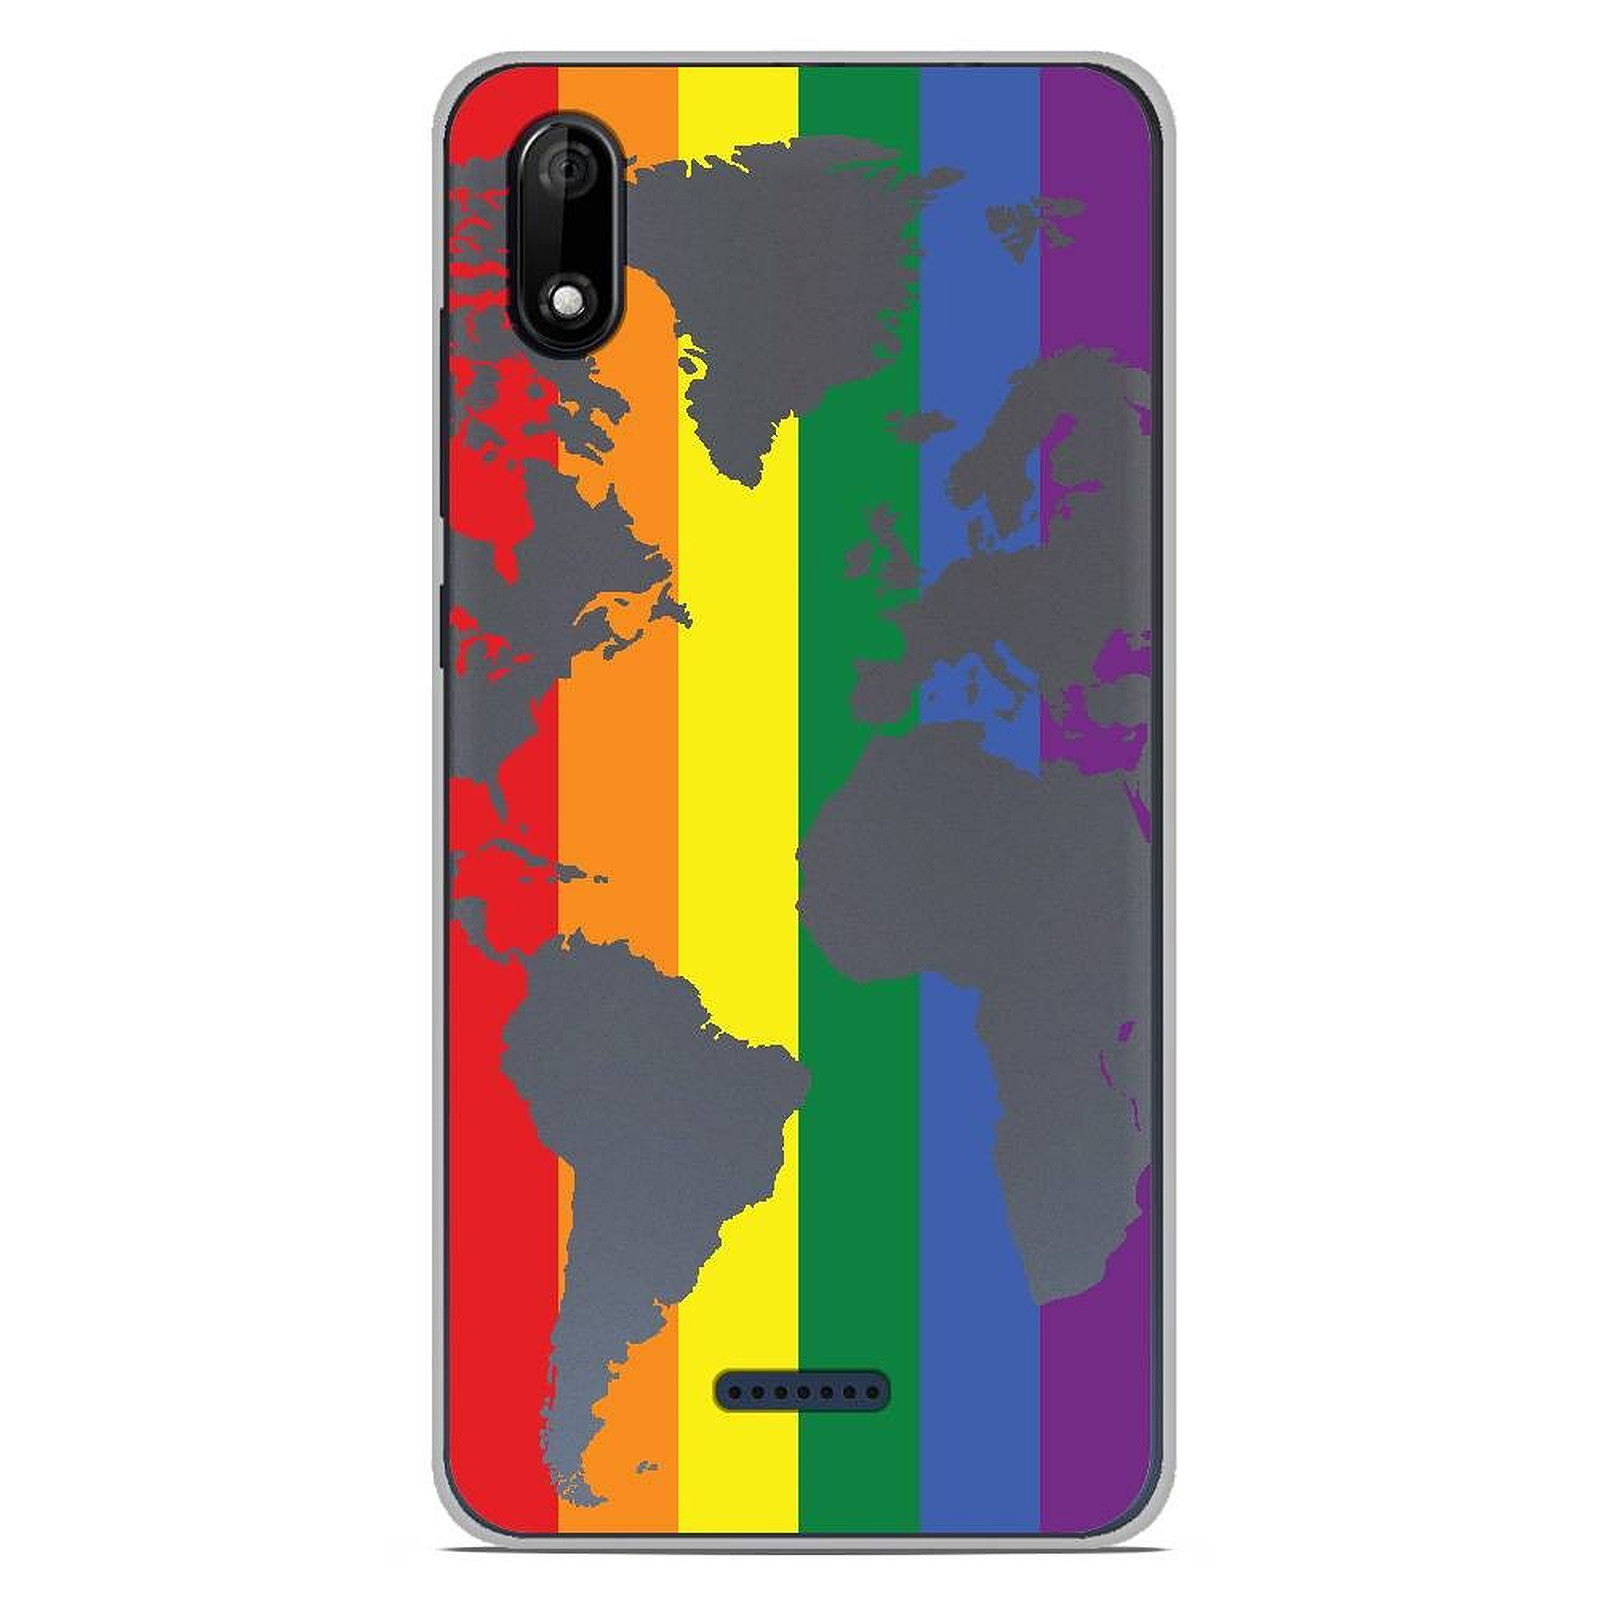 1001 Coques Coque silicone gel Wiko Y50 motif Map LGBT - Coque telephone 1001Coques